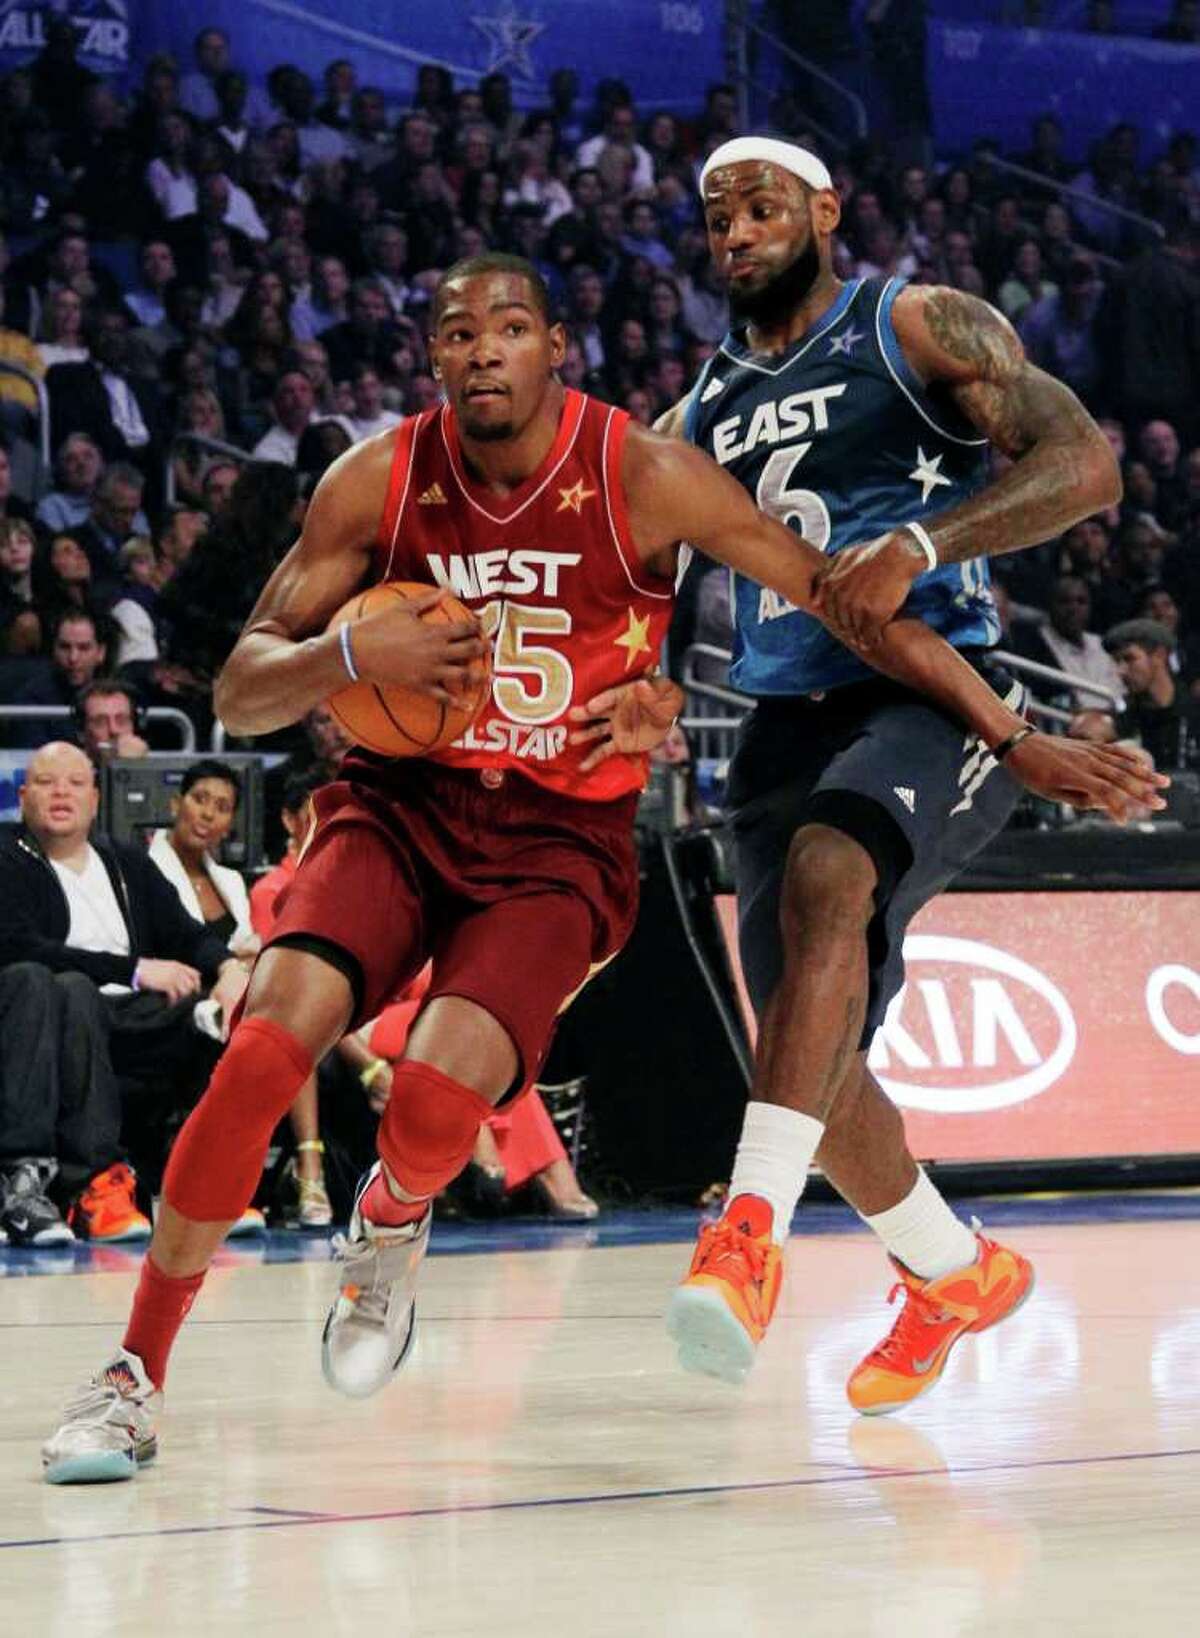 Eastern Conference's LeBron James (6), of the Miami Heat, pressures Western Conference's Kevin Durant (35), of the Oklahoma City Thunder, during the NBA All-Star basketball game, Sunday, Feb. 26, 2012, in Orlando, Fla.